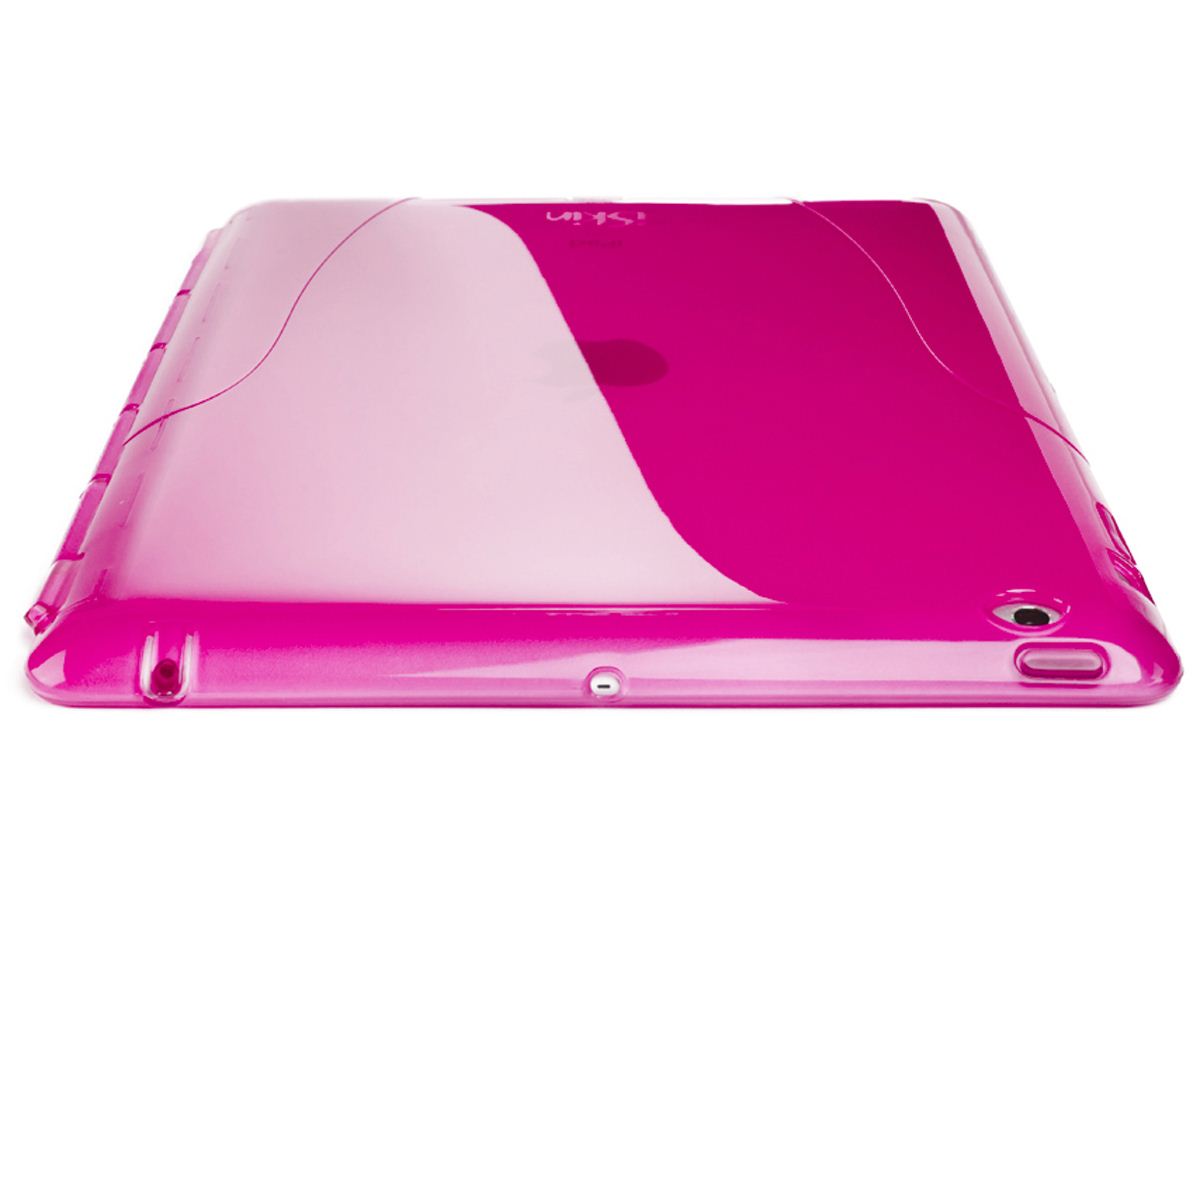 Solo Smart for New iPad and iPad 2 - Cosmo (translucent pink)